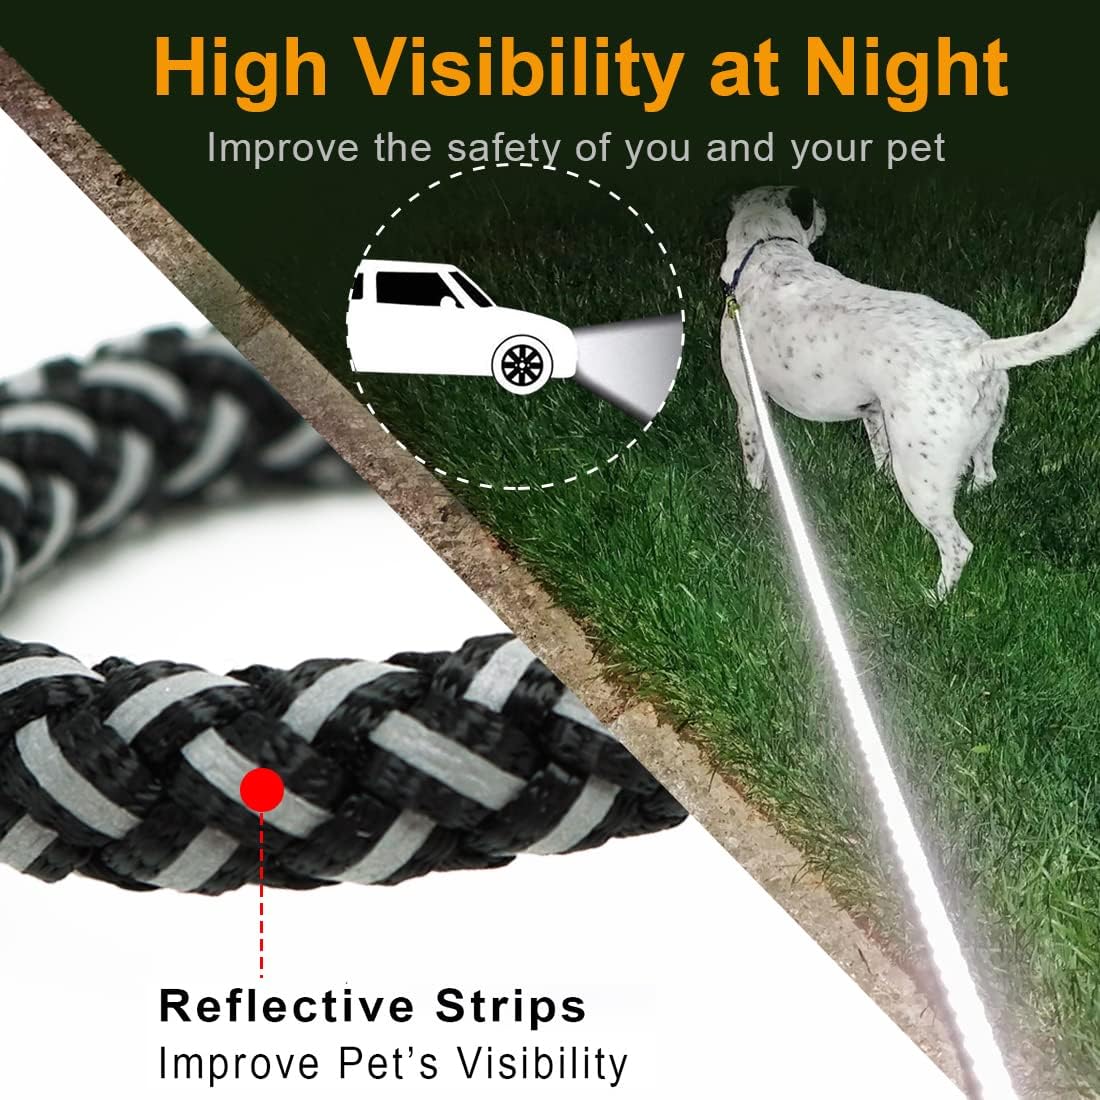 Mycicy 2FT 3FT 4FT 6FT 10FT Reflective Dog Leash - A Review of the Perfect Training Leash for Your Furry Friend